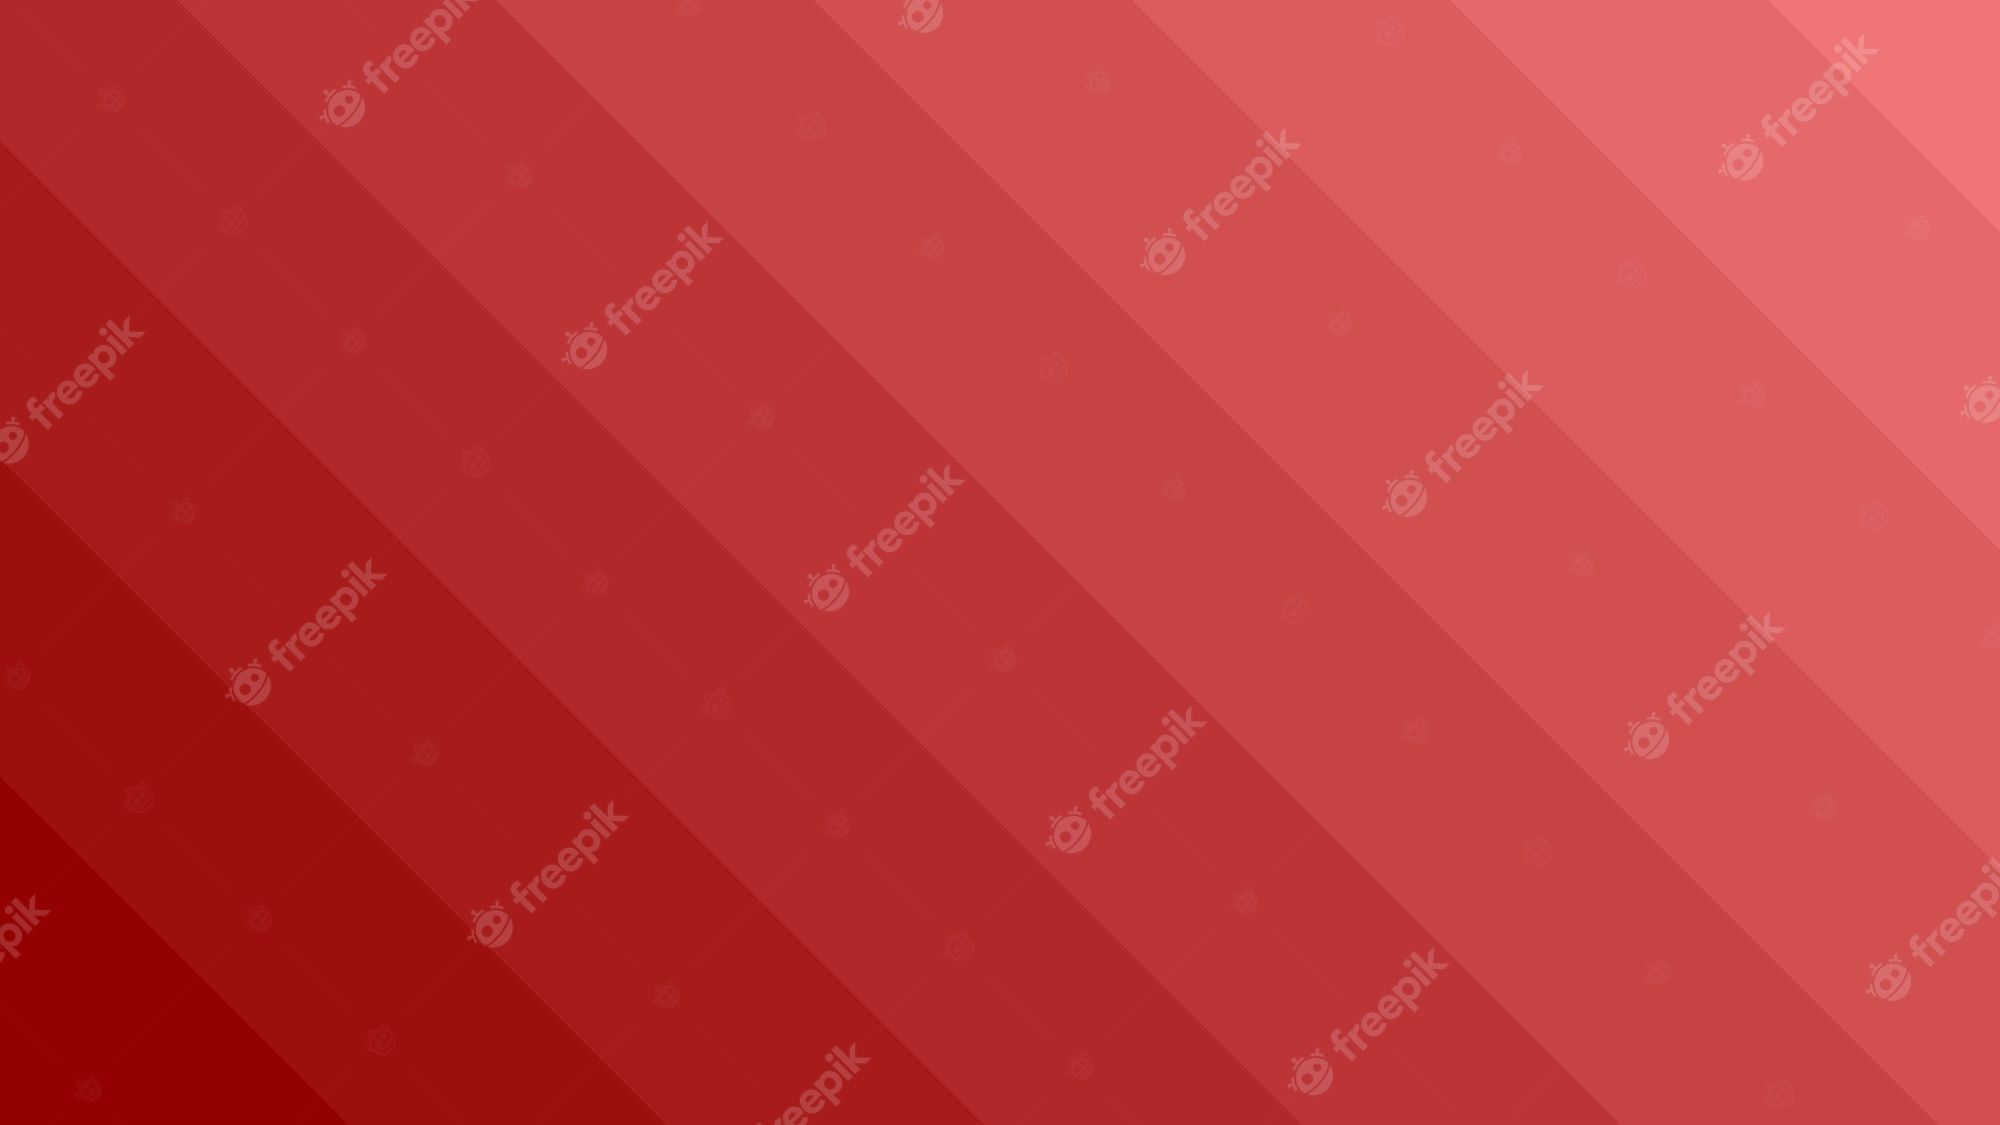 Red gradient abstract background with diagonal lines. - Light red